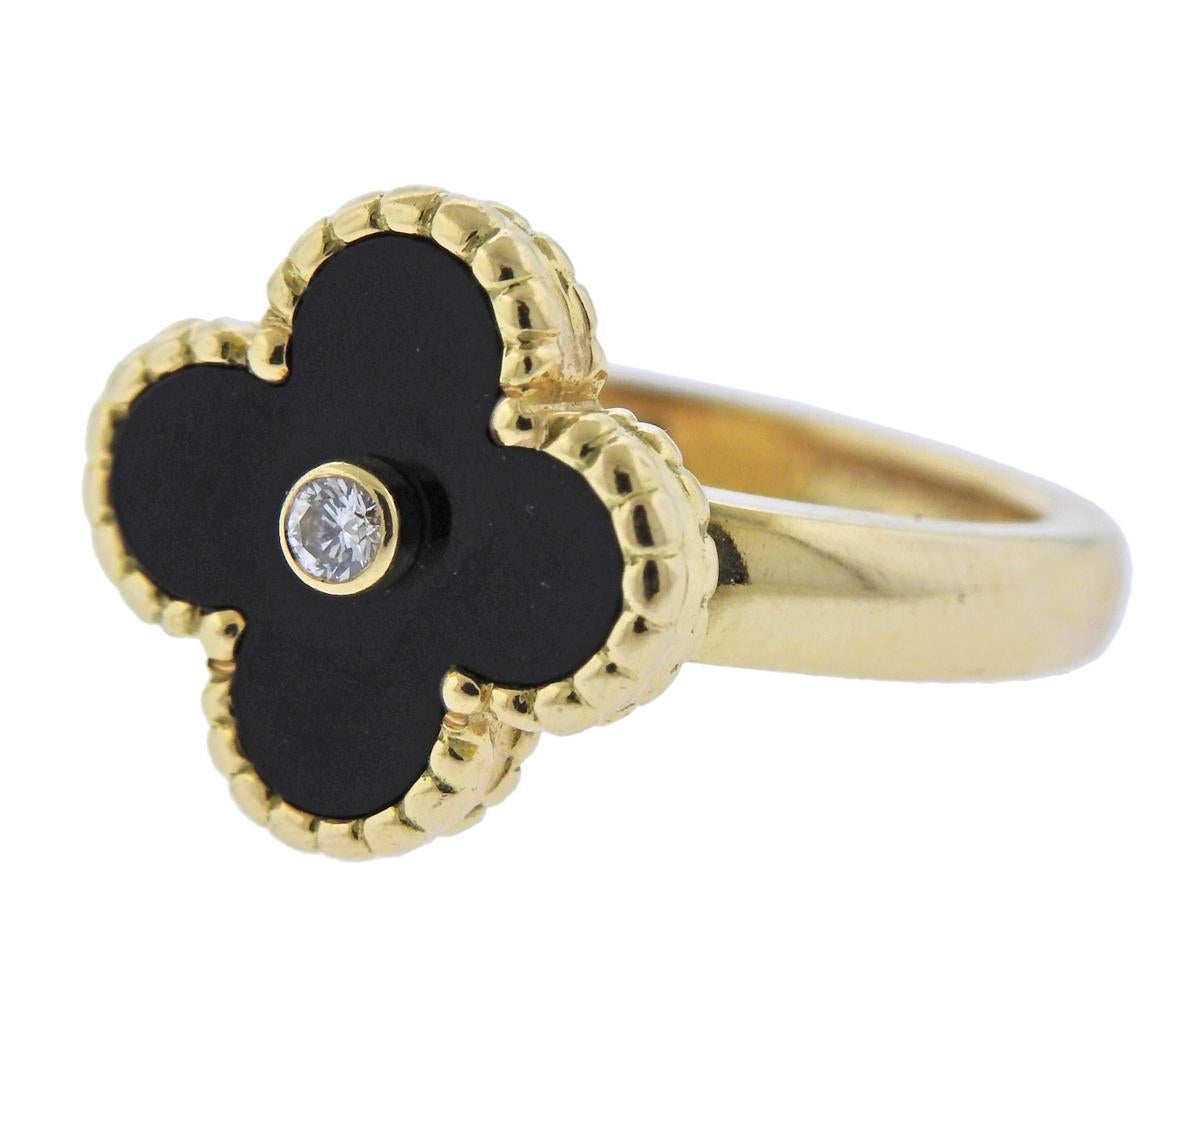 18k yellow gold Vintage Alhambra ring, crafted by Van Cleef & Arpels, set with onyx top and 0.06ct VVS/FG diamond in the center. Retail $3150, comes with COA. Ring size - 5.75, ring top measures 15mm x 15mm and weighs 8.1 grams. 